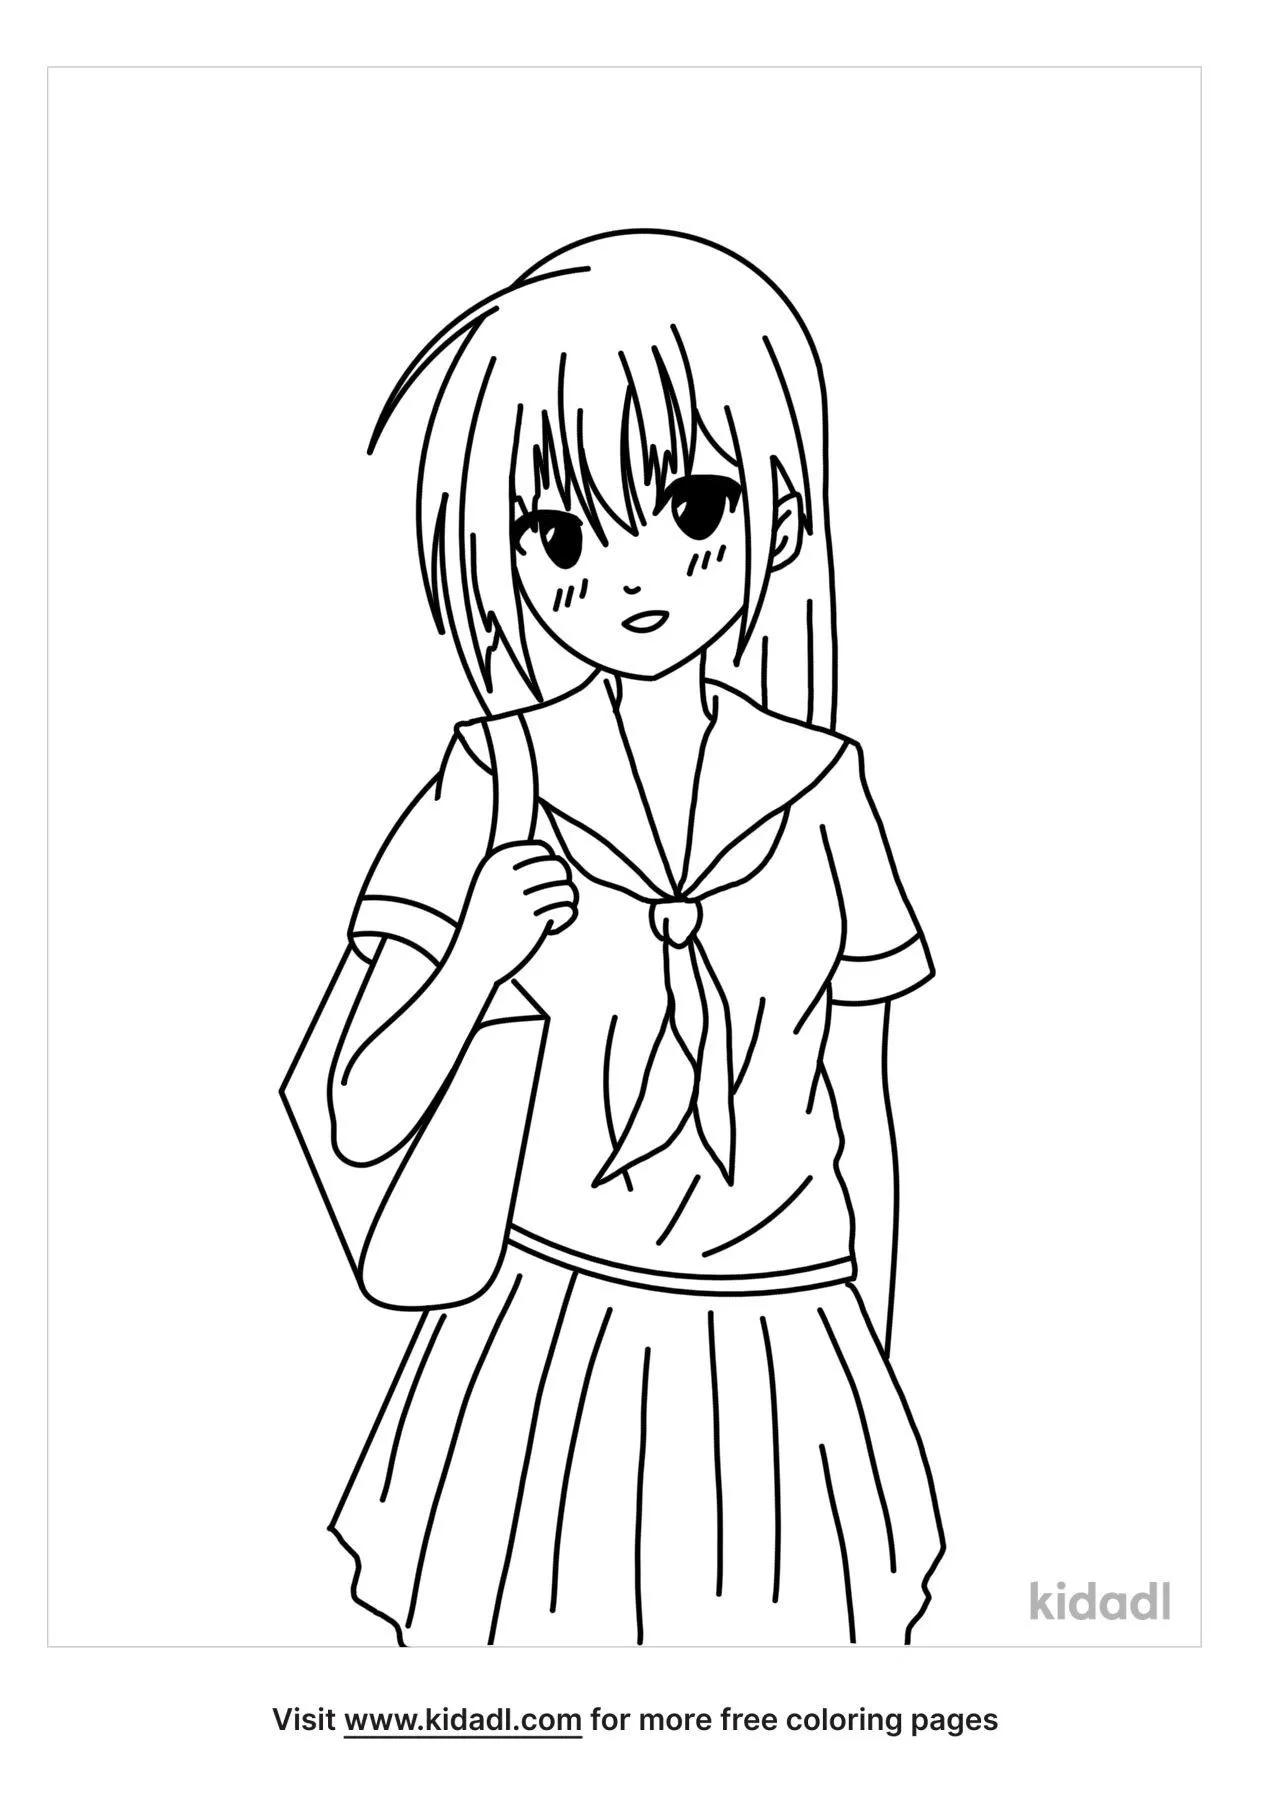 Free Anime School Girl Coloring Page | Coloring Page Printables | Kidadl